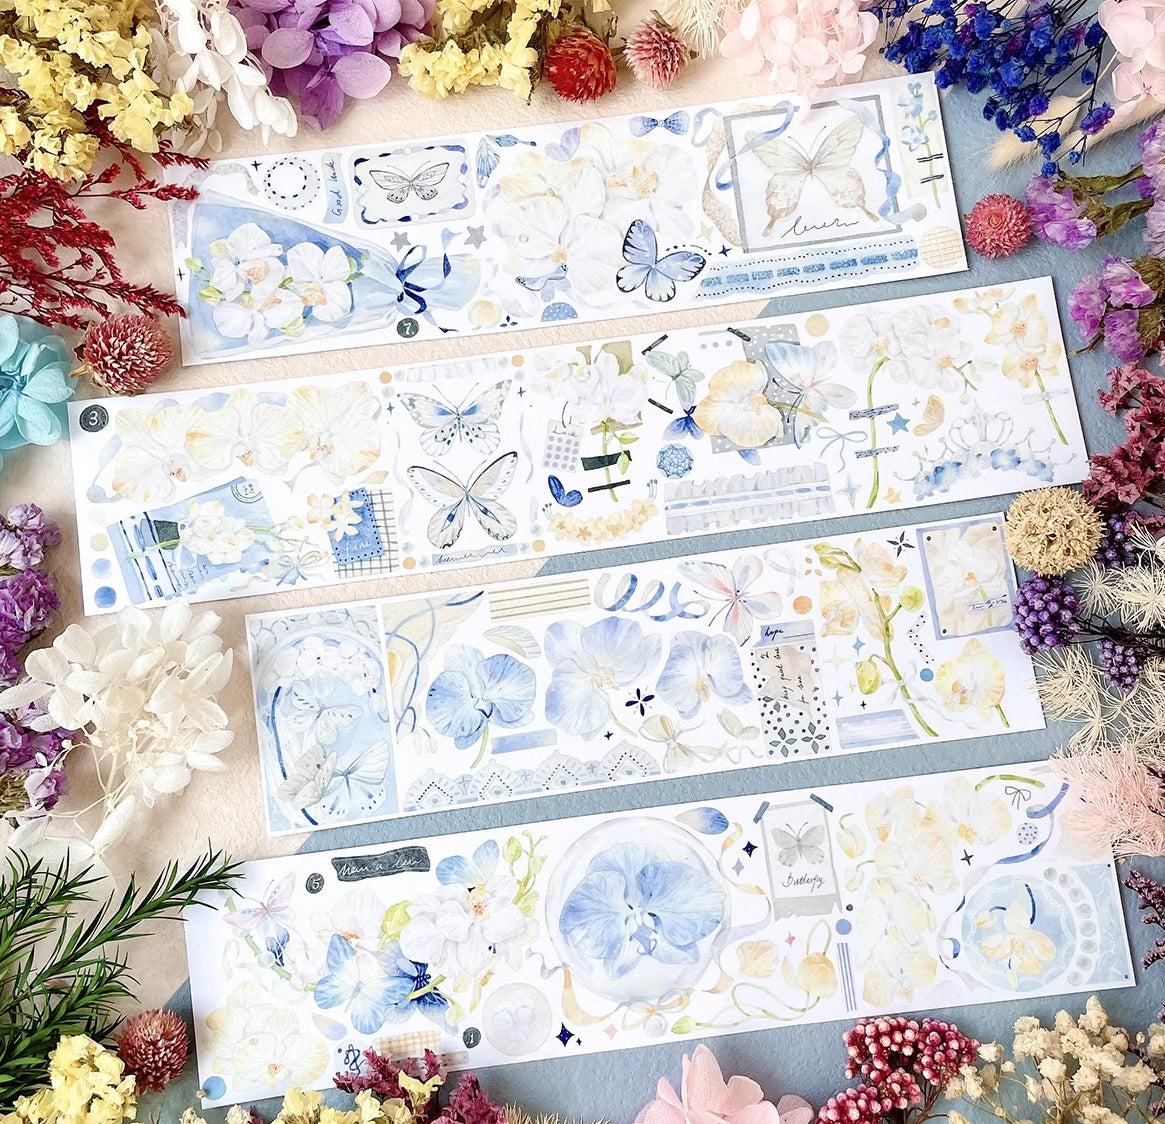 Menu Stationery Tape Sample: Butterfly Orchid